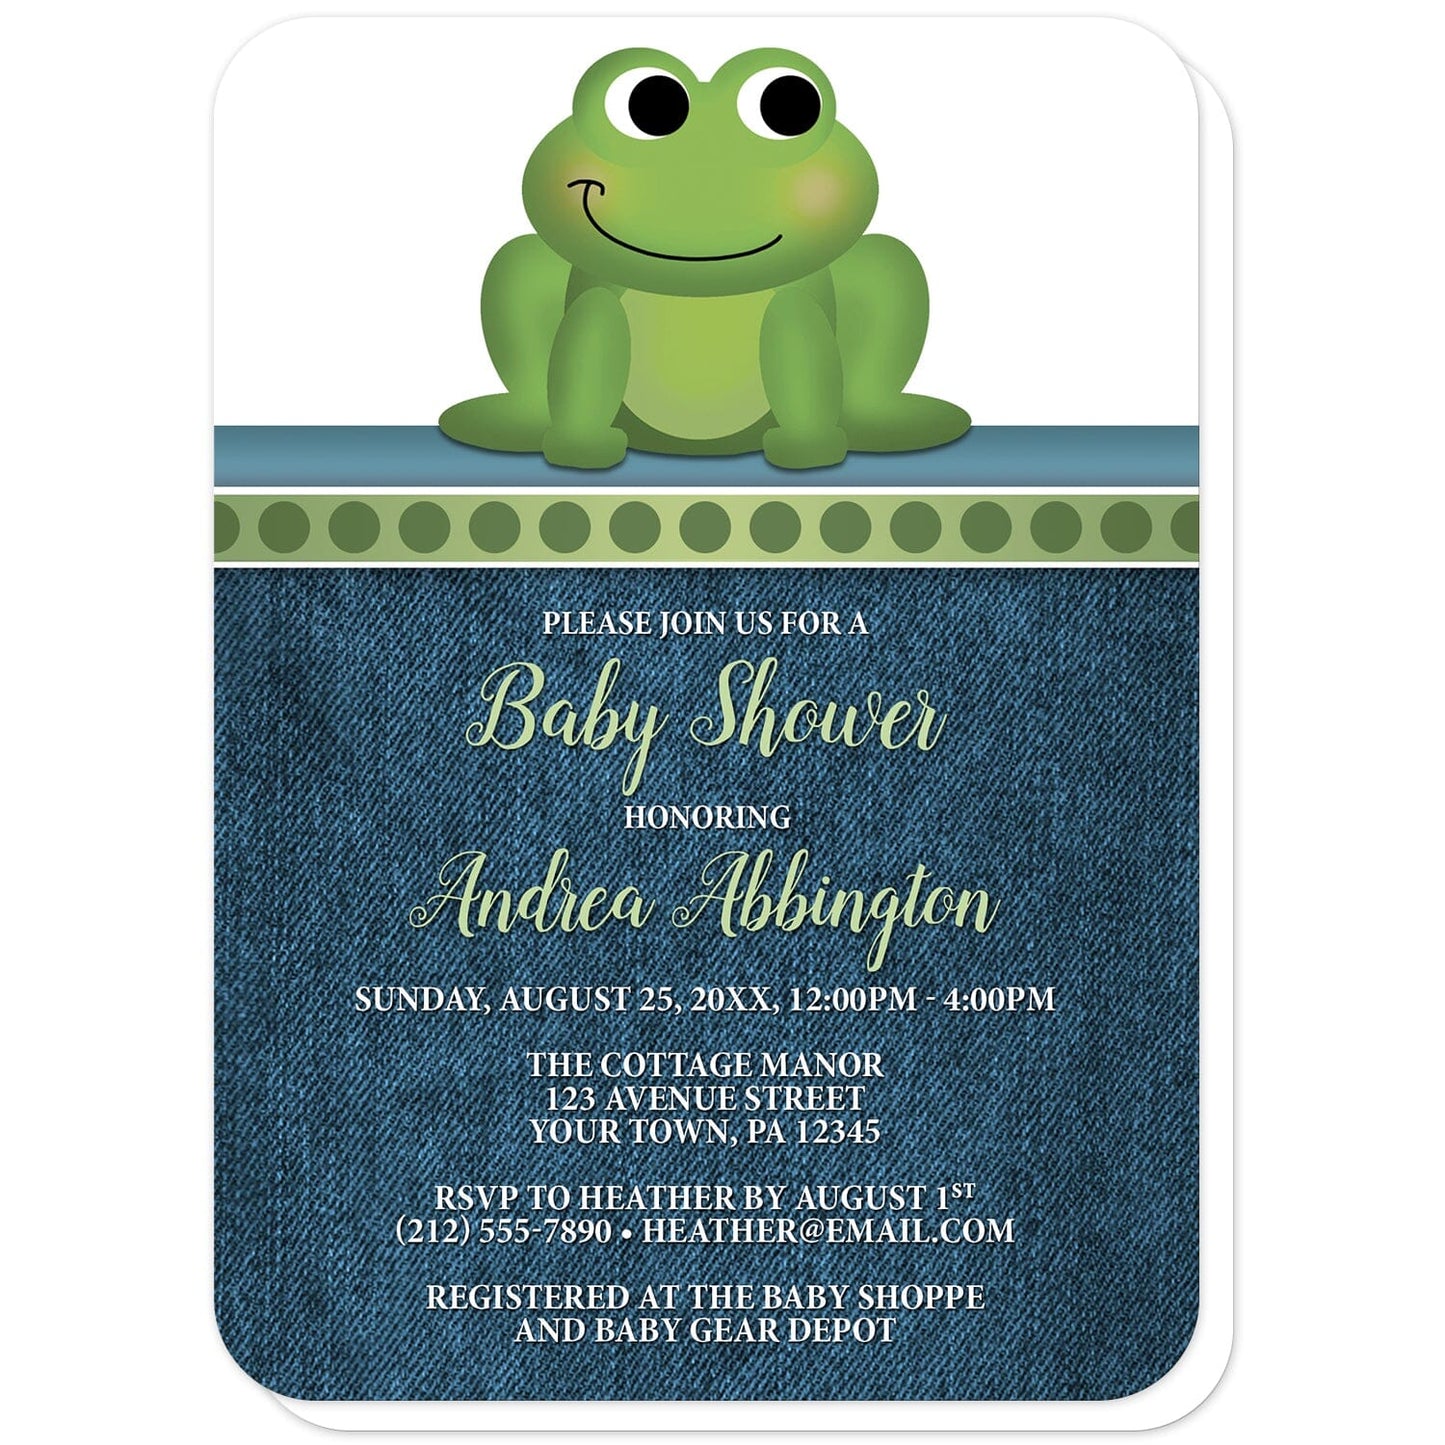 Cute Frog Green Rustic Denim Baby Shower Invitations (with rounded corners) at Artistically Invited. Cute frog green rustic denim baby shower invitations with an illustration of an adorable smiling green frog. A dotted green border separates the cute frog from your invitation details. The personalized information you provide for the baby shower celebration will be custom printed in green and white over a rustic blue denim background.